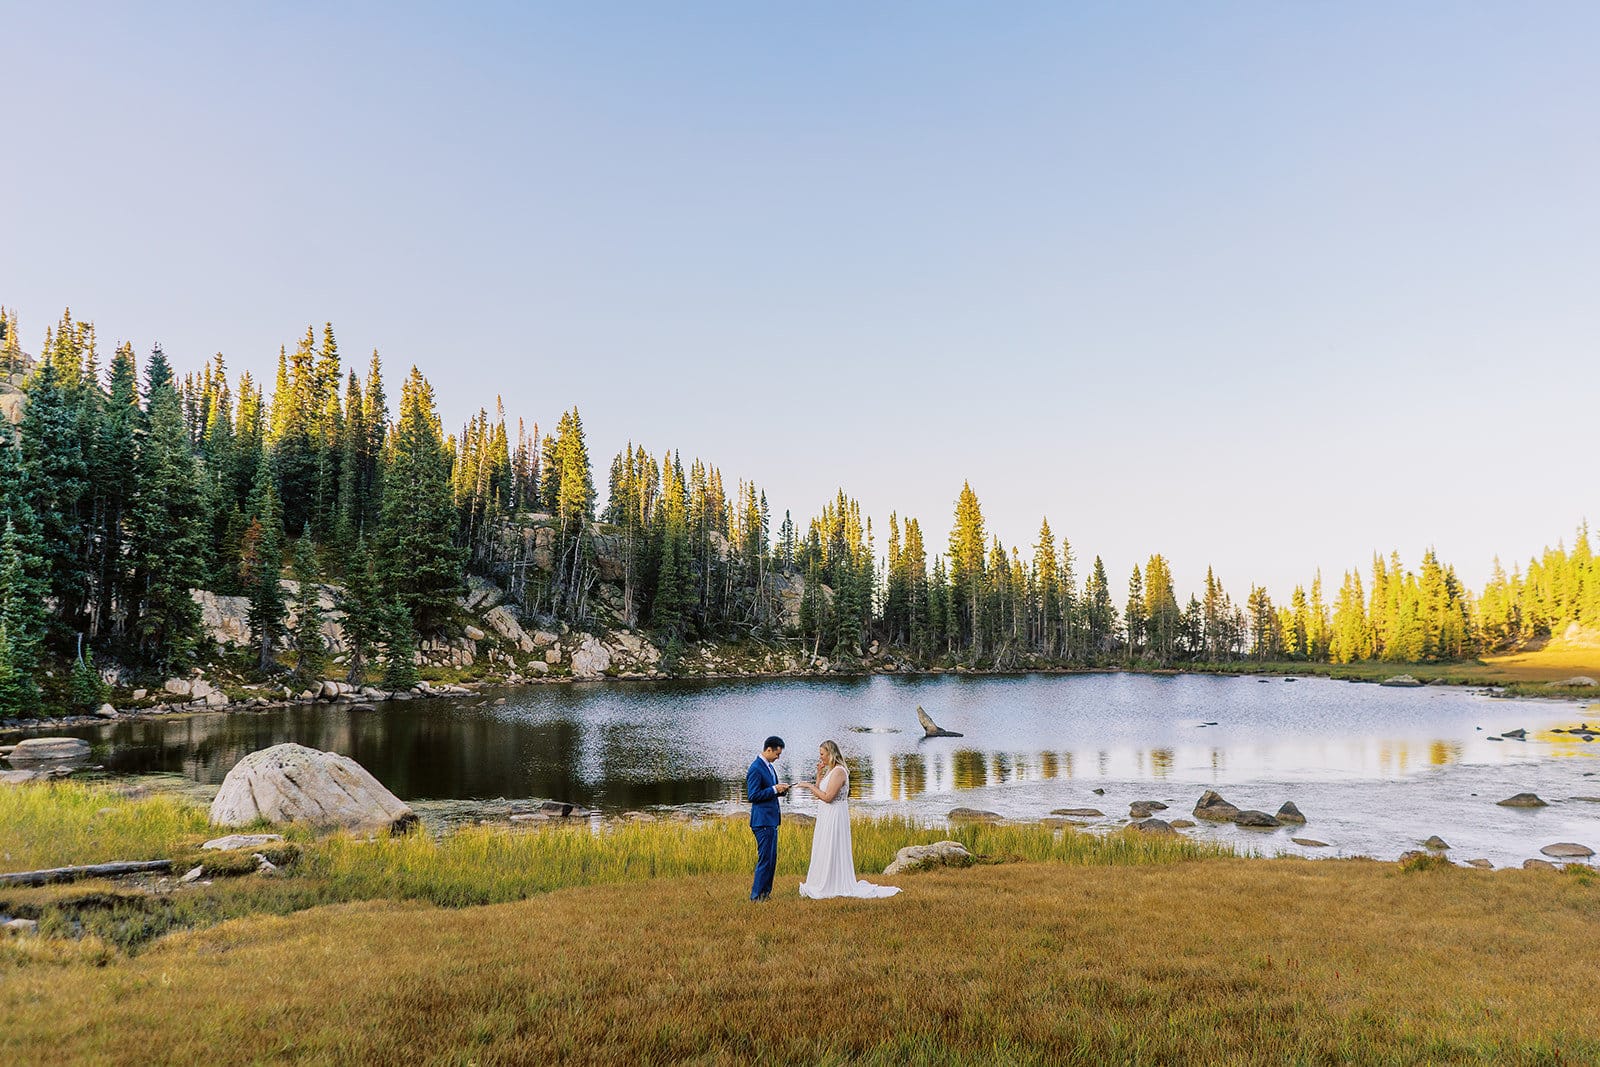 Bride and groom share vows together at their sunset elopement ceremony in Bend, Oregon near a lake in the forest.